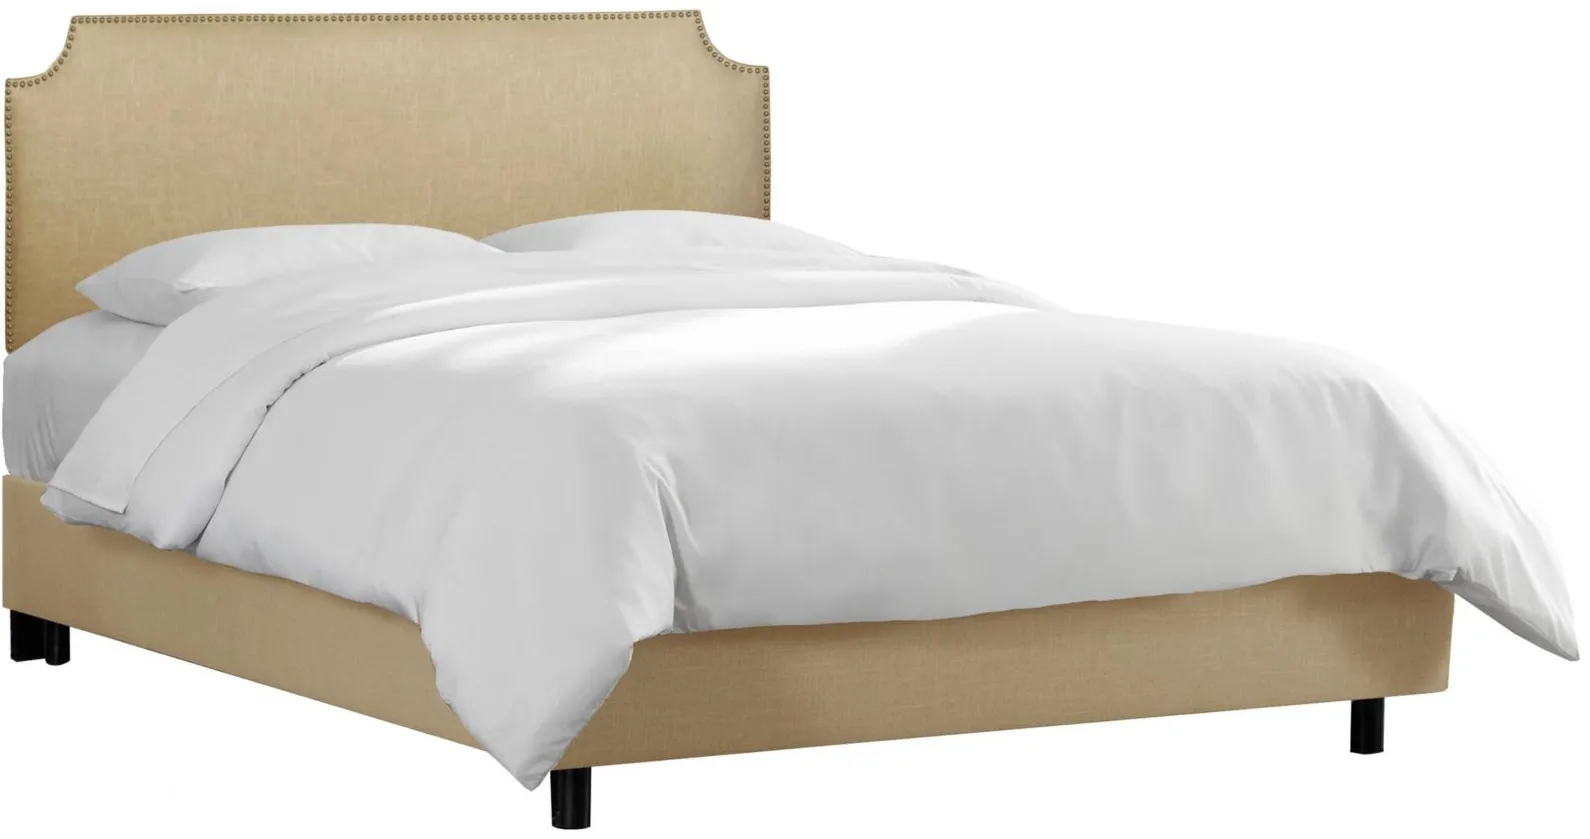 McGee Bed in Linen Sandstone by Skyline